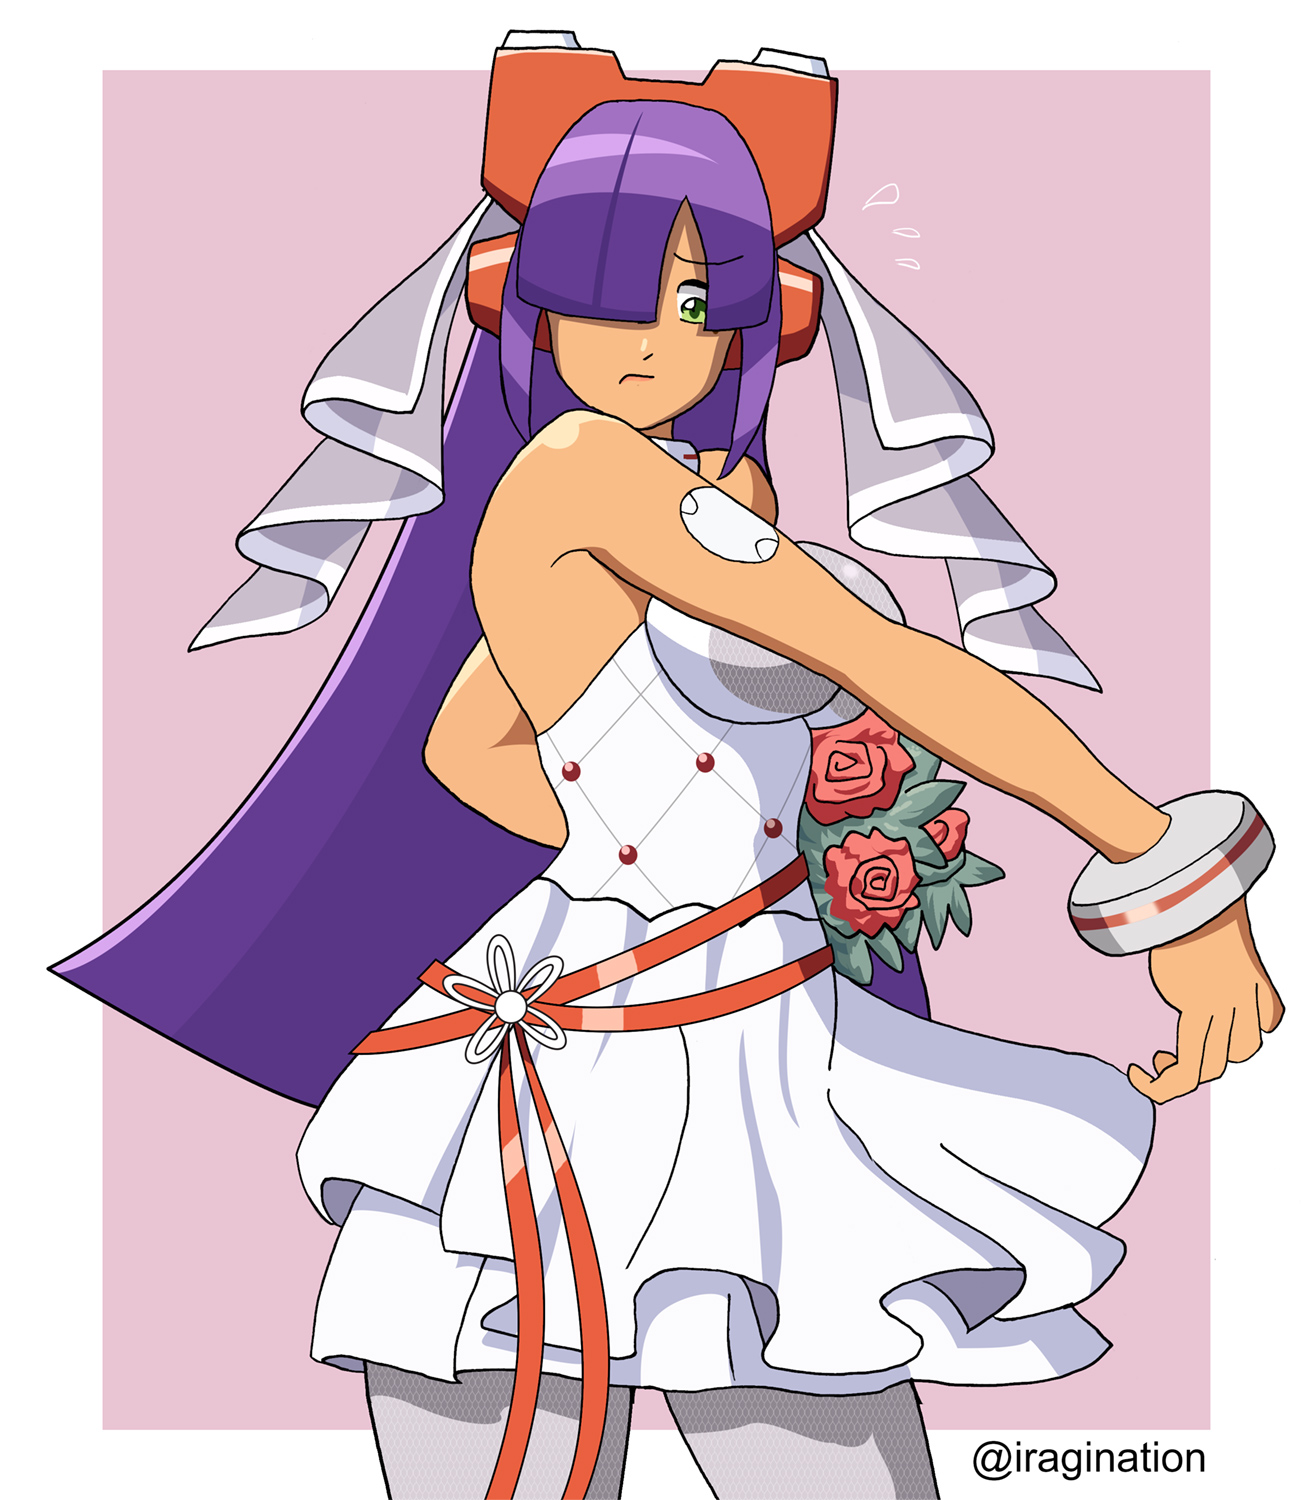 Bridal Layer - Rockman X DiVE
I had to crop Layer to fit her in the comic panel, so this is the full image.

See [url=https://www.iragination.com/illust/displayimage.php?pos=-536]the source comic[/url] for context.

Keywords: layeer